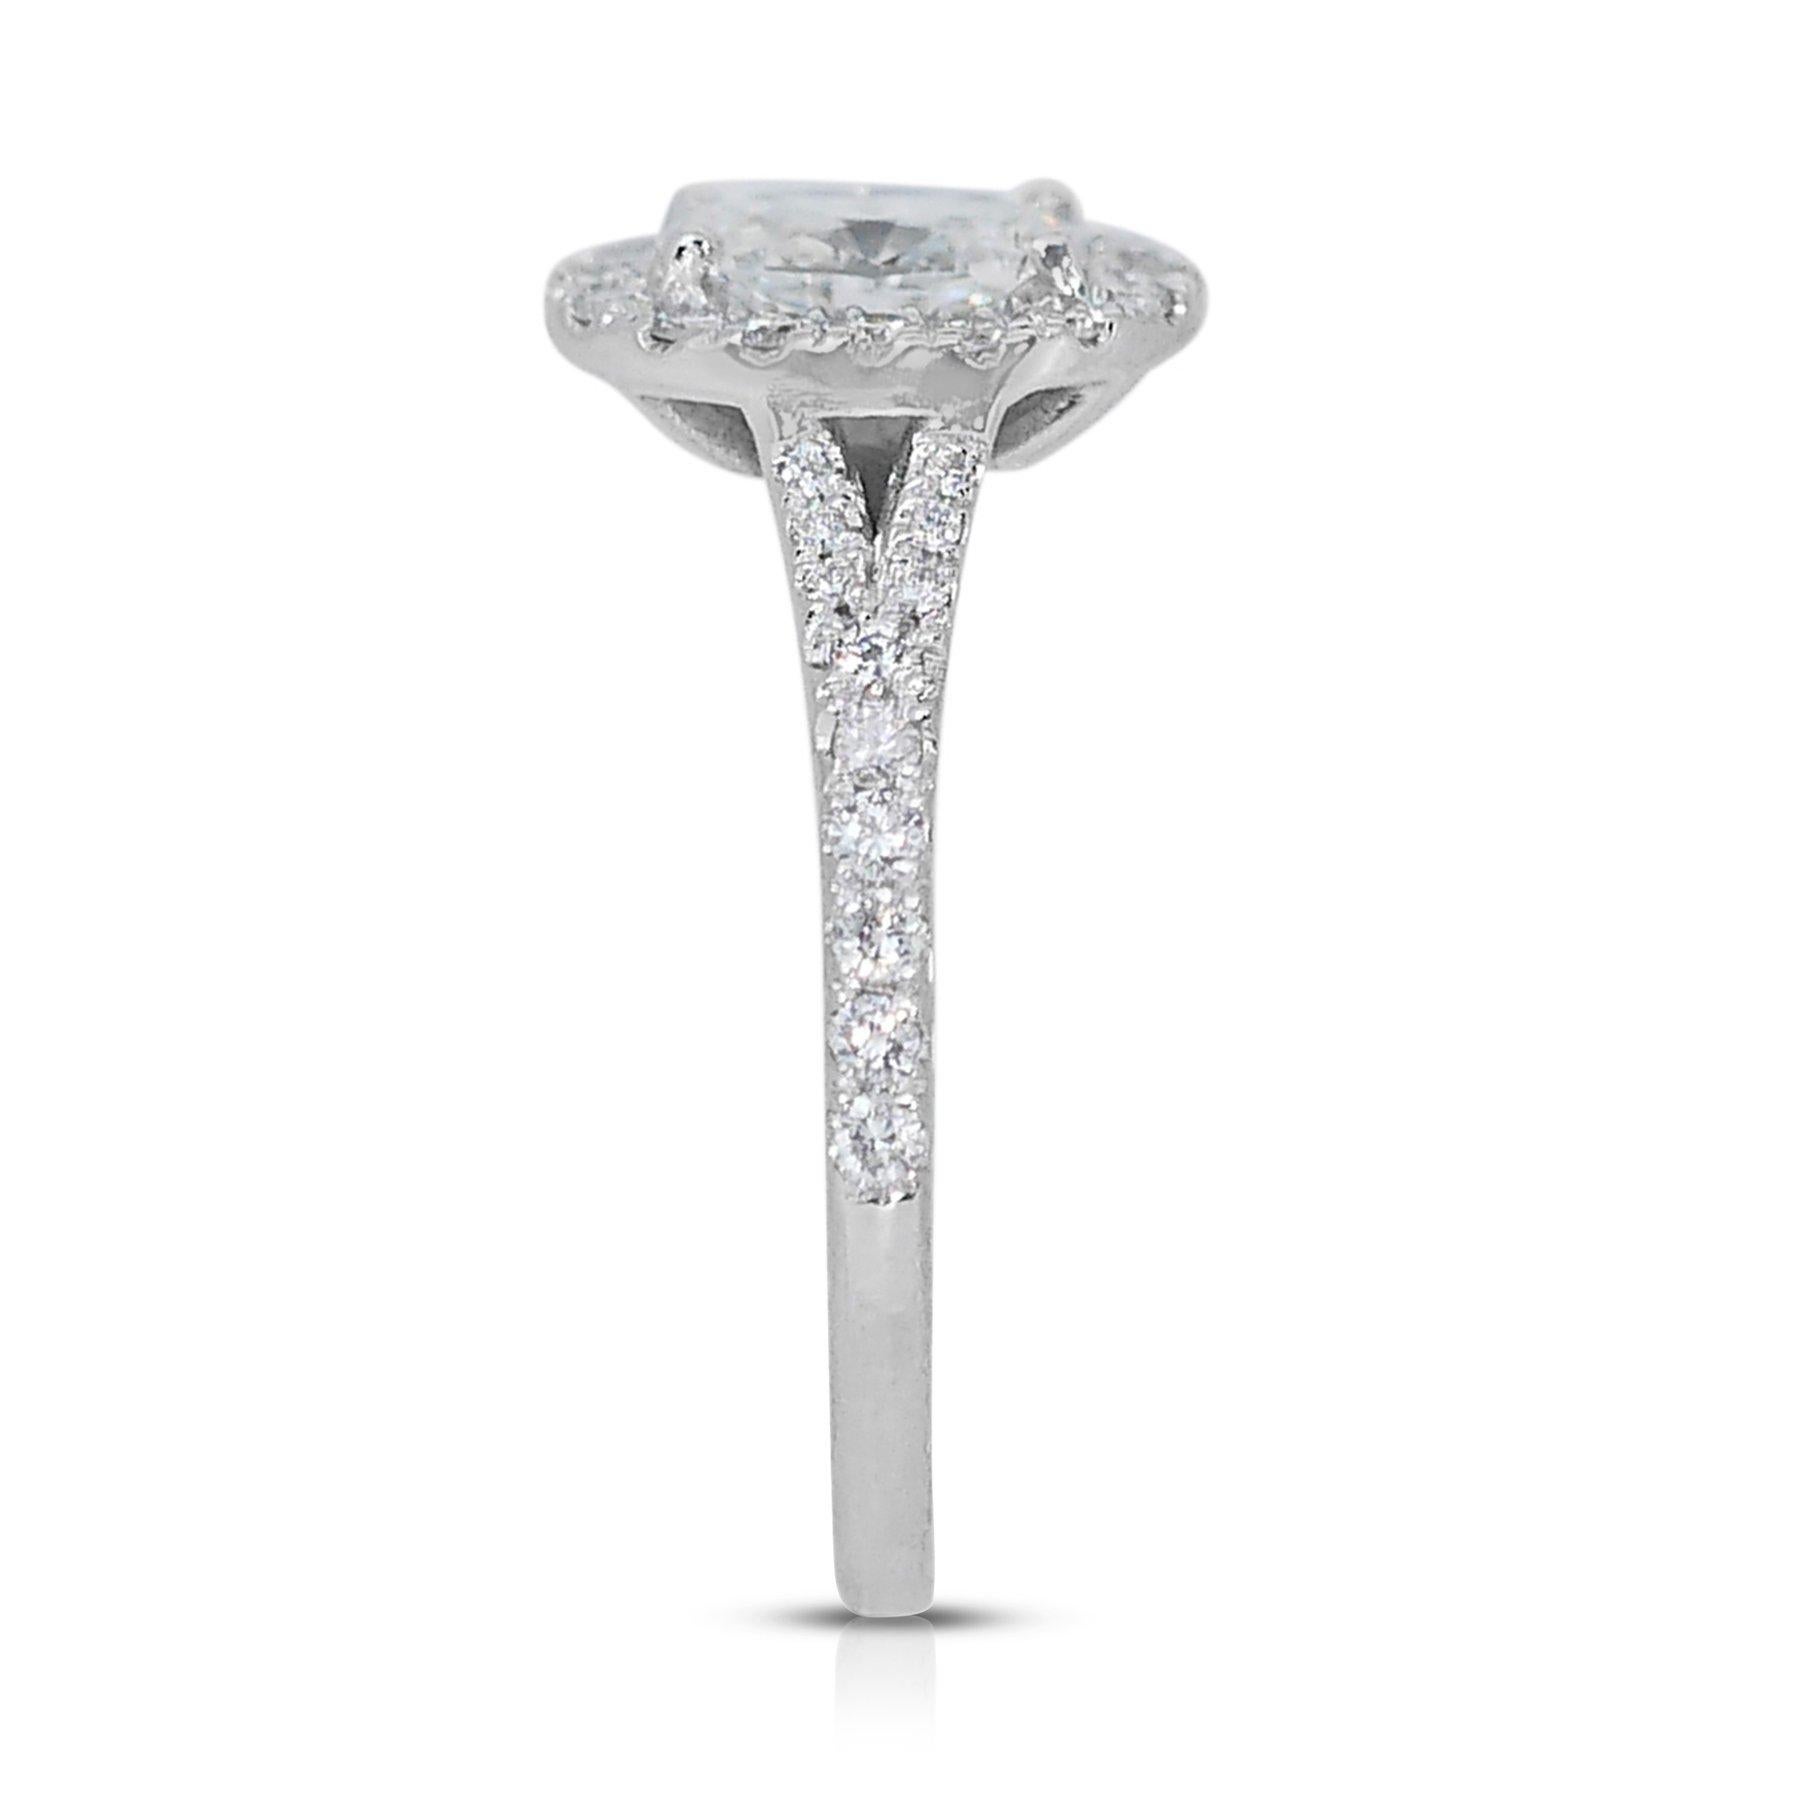 Exquisite 1.04ct Oval Diamond Halo Ring in 18k White Gold - GIA Certified For Sale 1